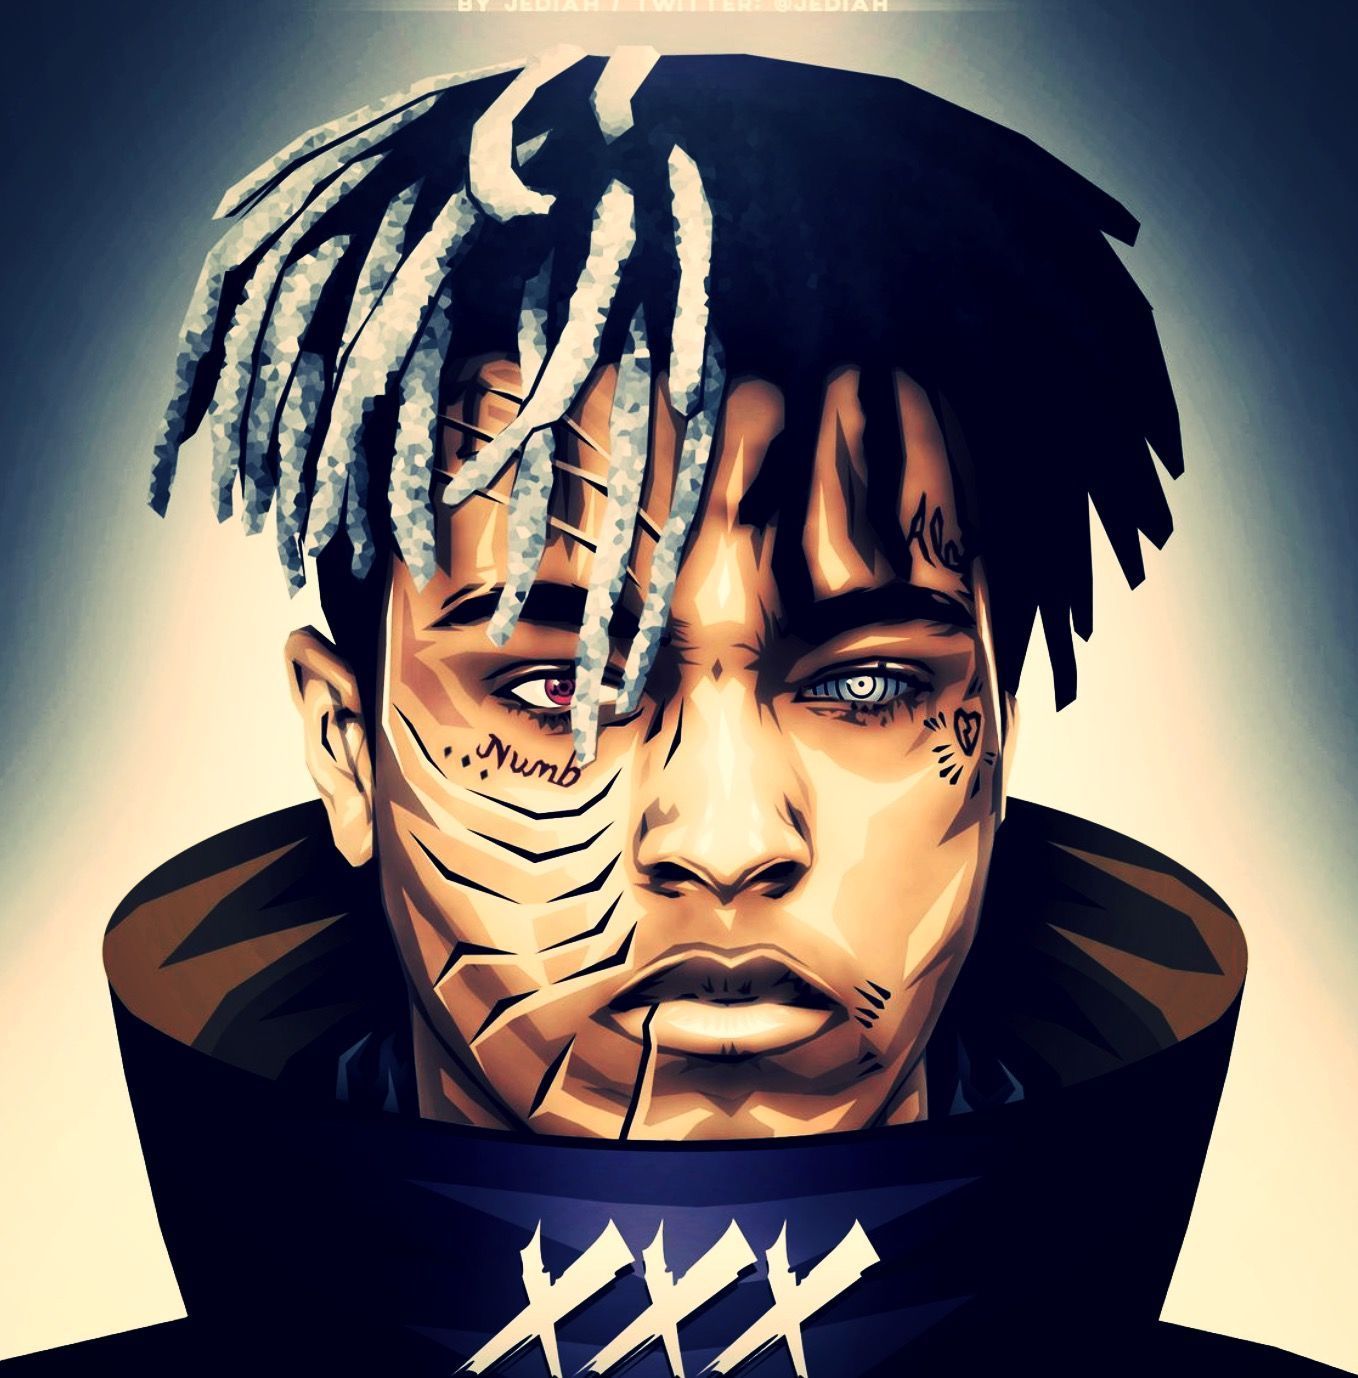 Cool Pictures Of Xxxtentacion posted by Zoey Johnson